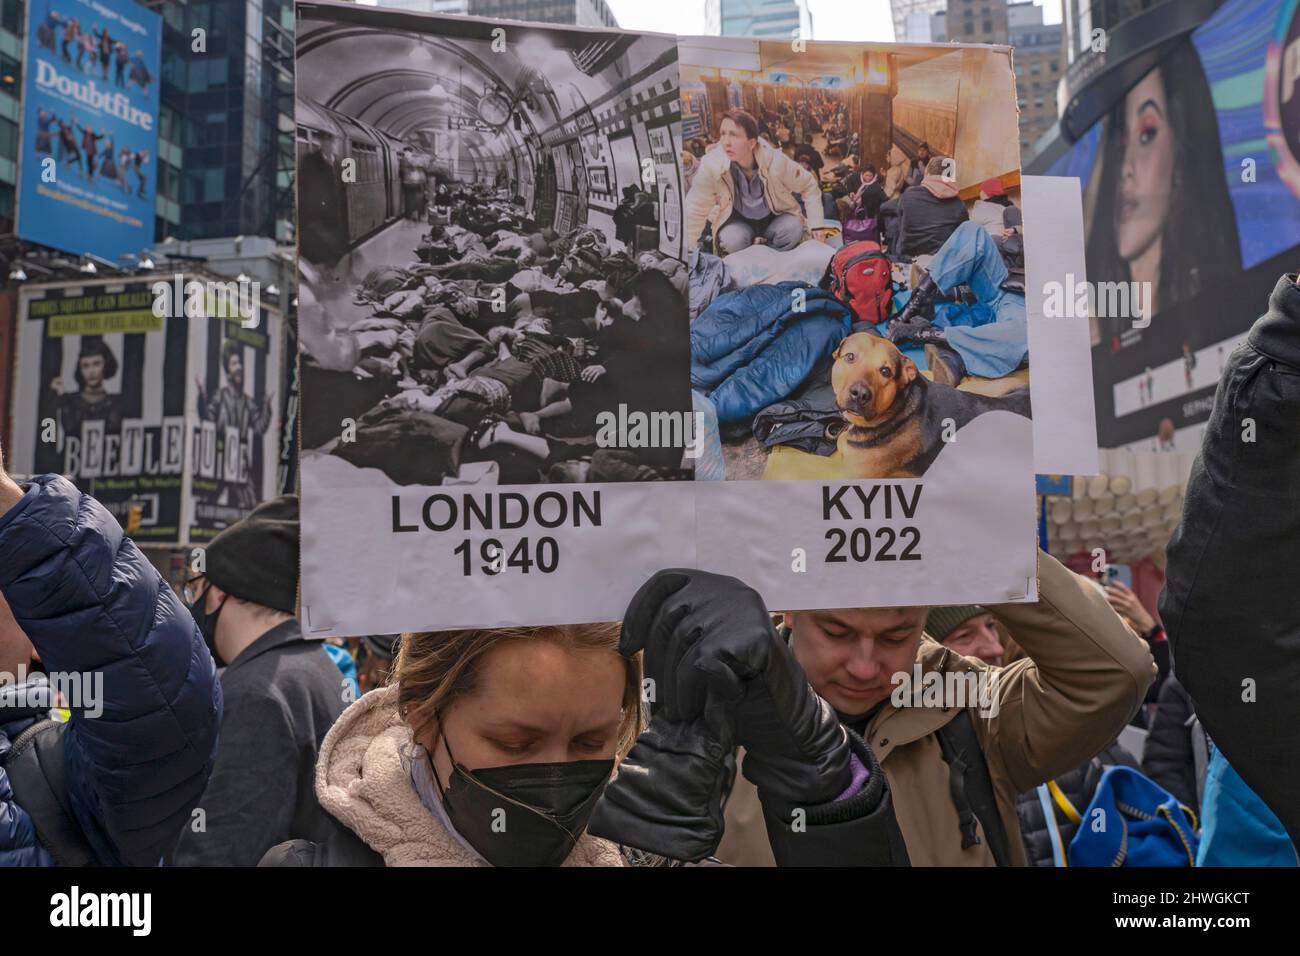 NEW YORK, NEW YORK - MARCH 05: A protester holds a sign comparing London of 1940 to Kyiv of 2022 at the 'Stand With Ukraine' rally in Times Square on March 5, 2022 in New York City. Ukrainians, Ukrainian-Americans and allies gathered to show support for Ukraine and protest against the Russian invasion. Credit: Ron Adar/Alamy Live News Stock Photo